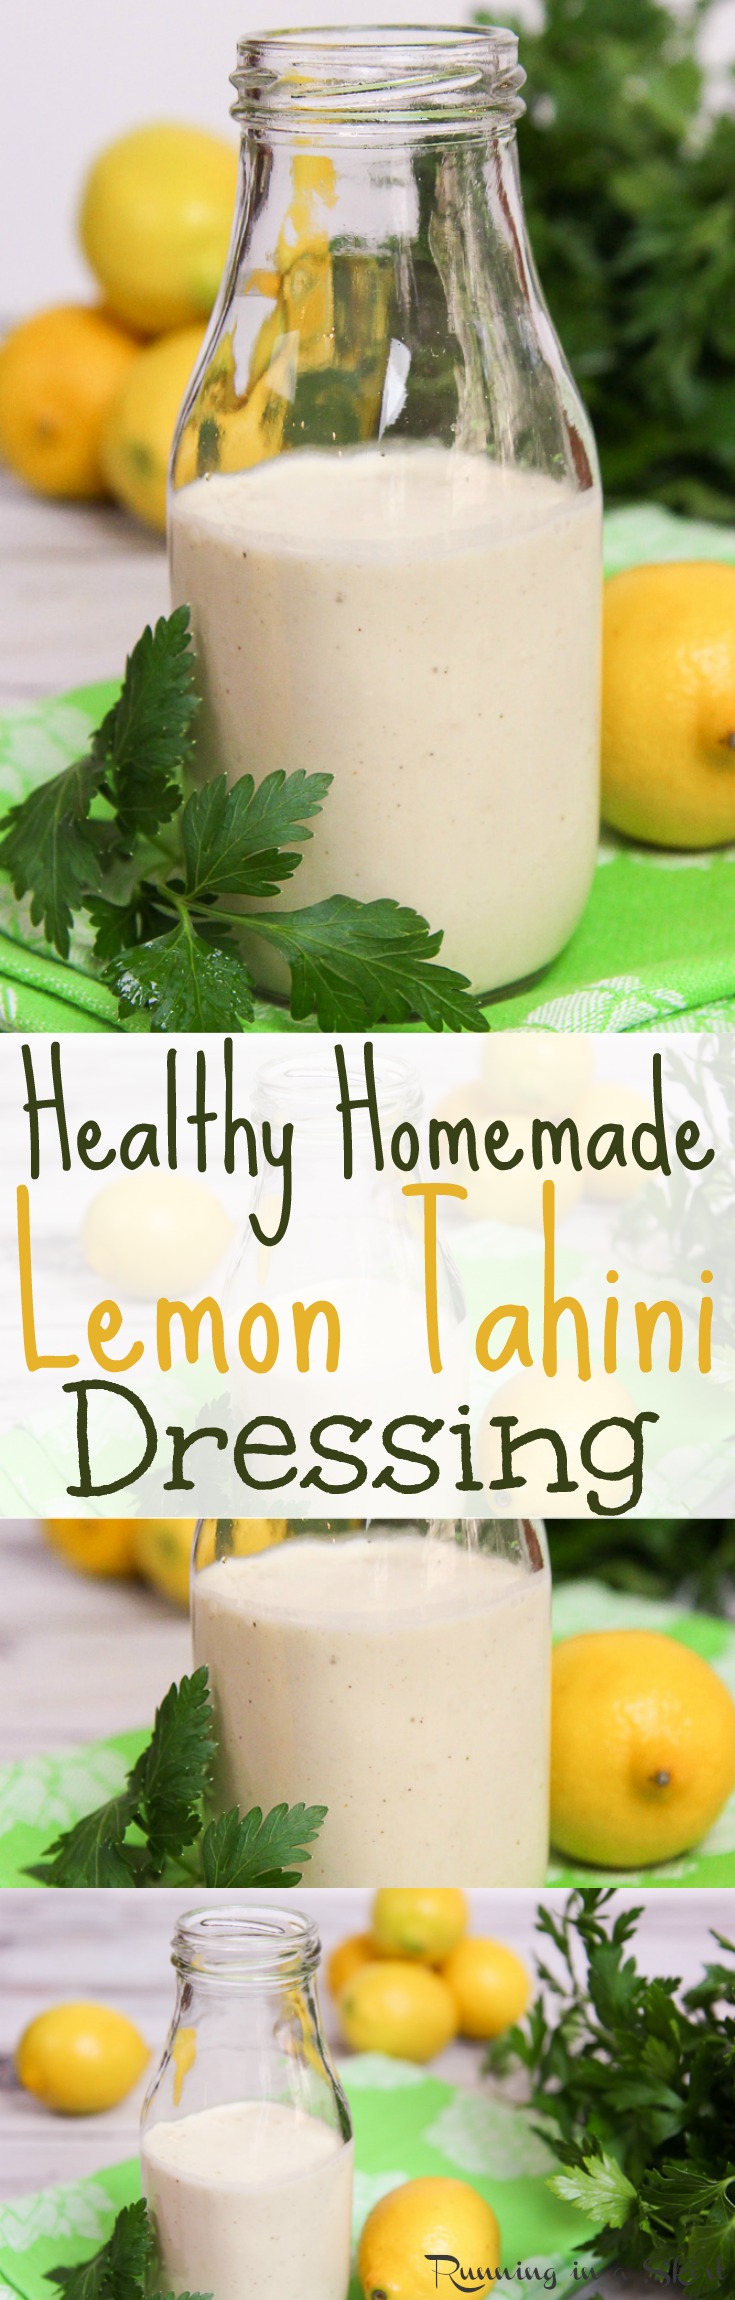 The Best 4 Ingredient Lemon Tahini Dressing recipe. This healthy, homemade, clean eating dressing is easy and vegan. It's great for salads, veggies, roasted vegetables, a buddha bowl or any vegetarian dish. Tastes amazing! / Running in a Skirt via @juliewunder